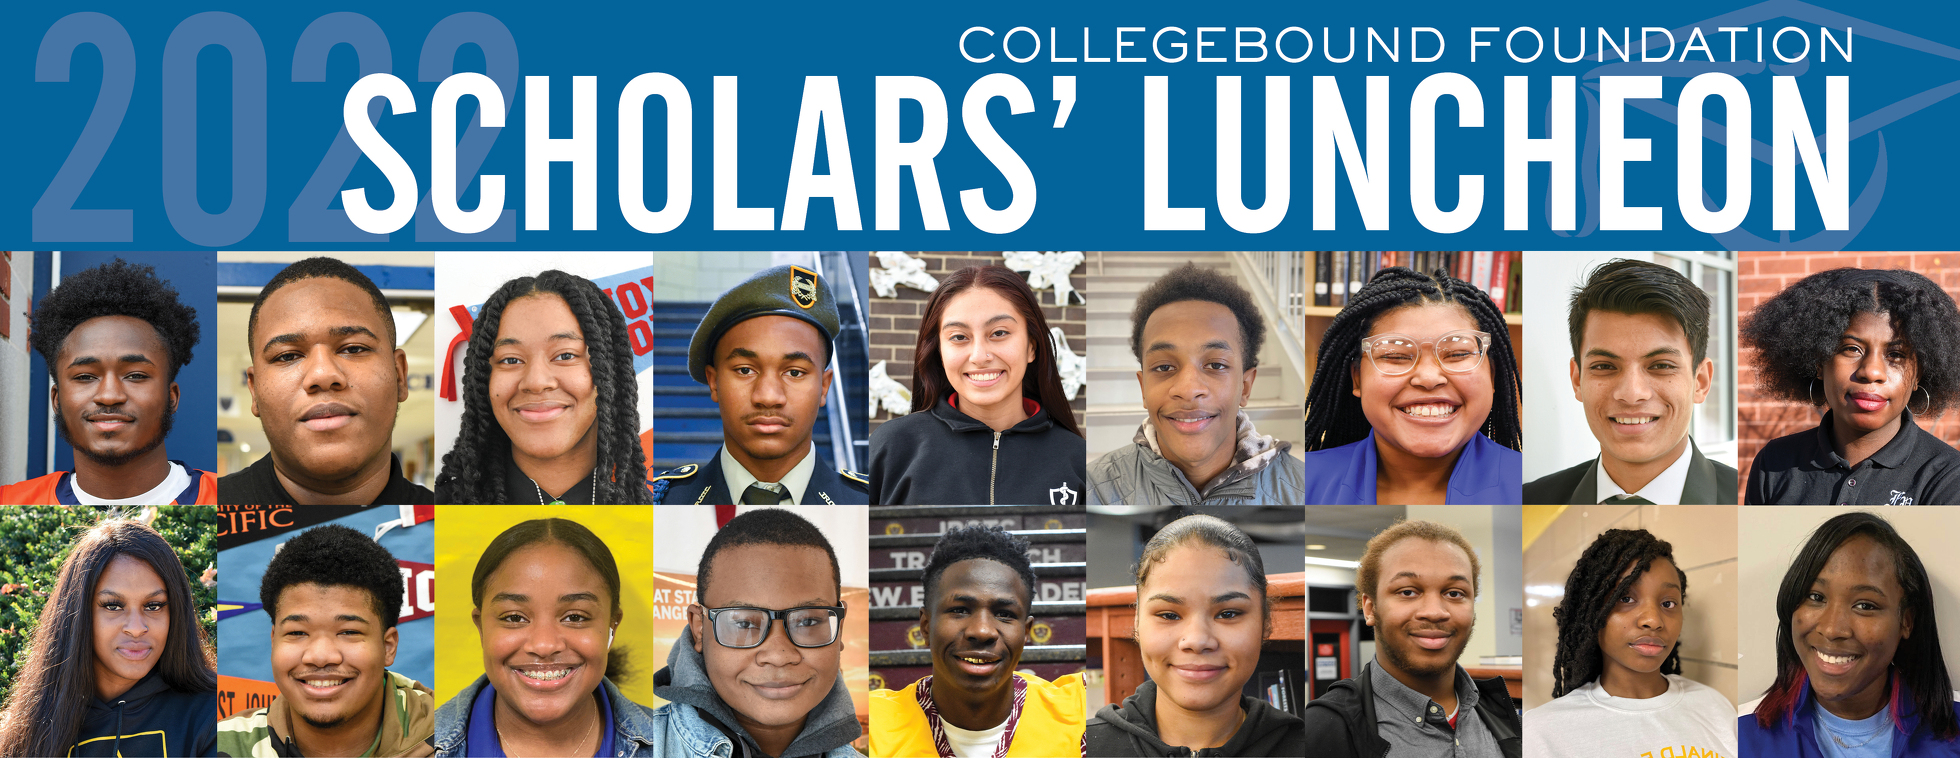 34th annual Scholars' Luncheon